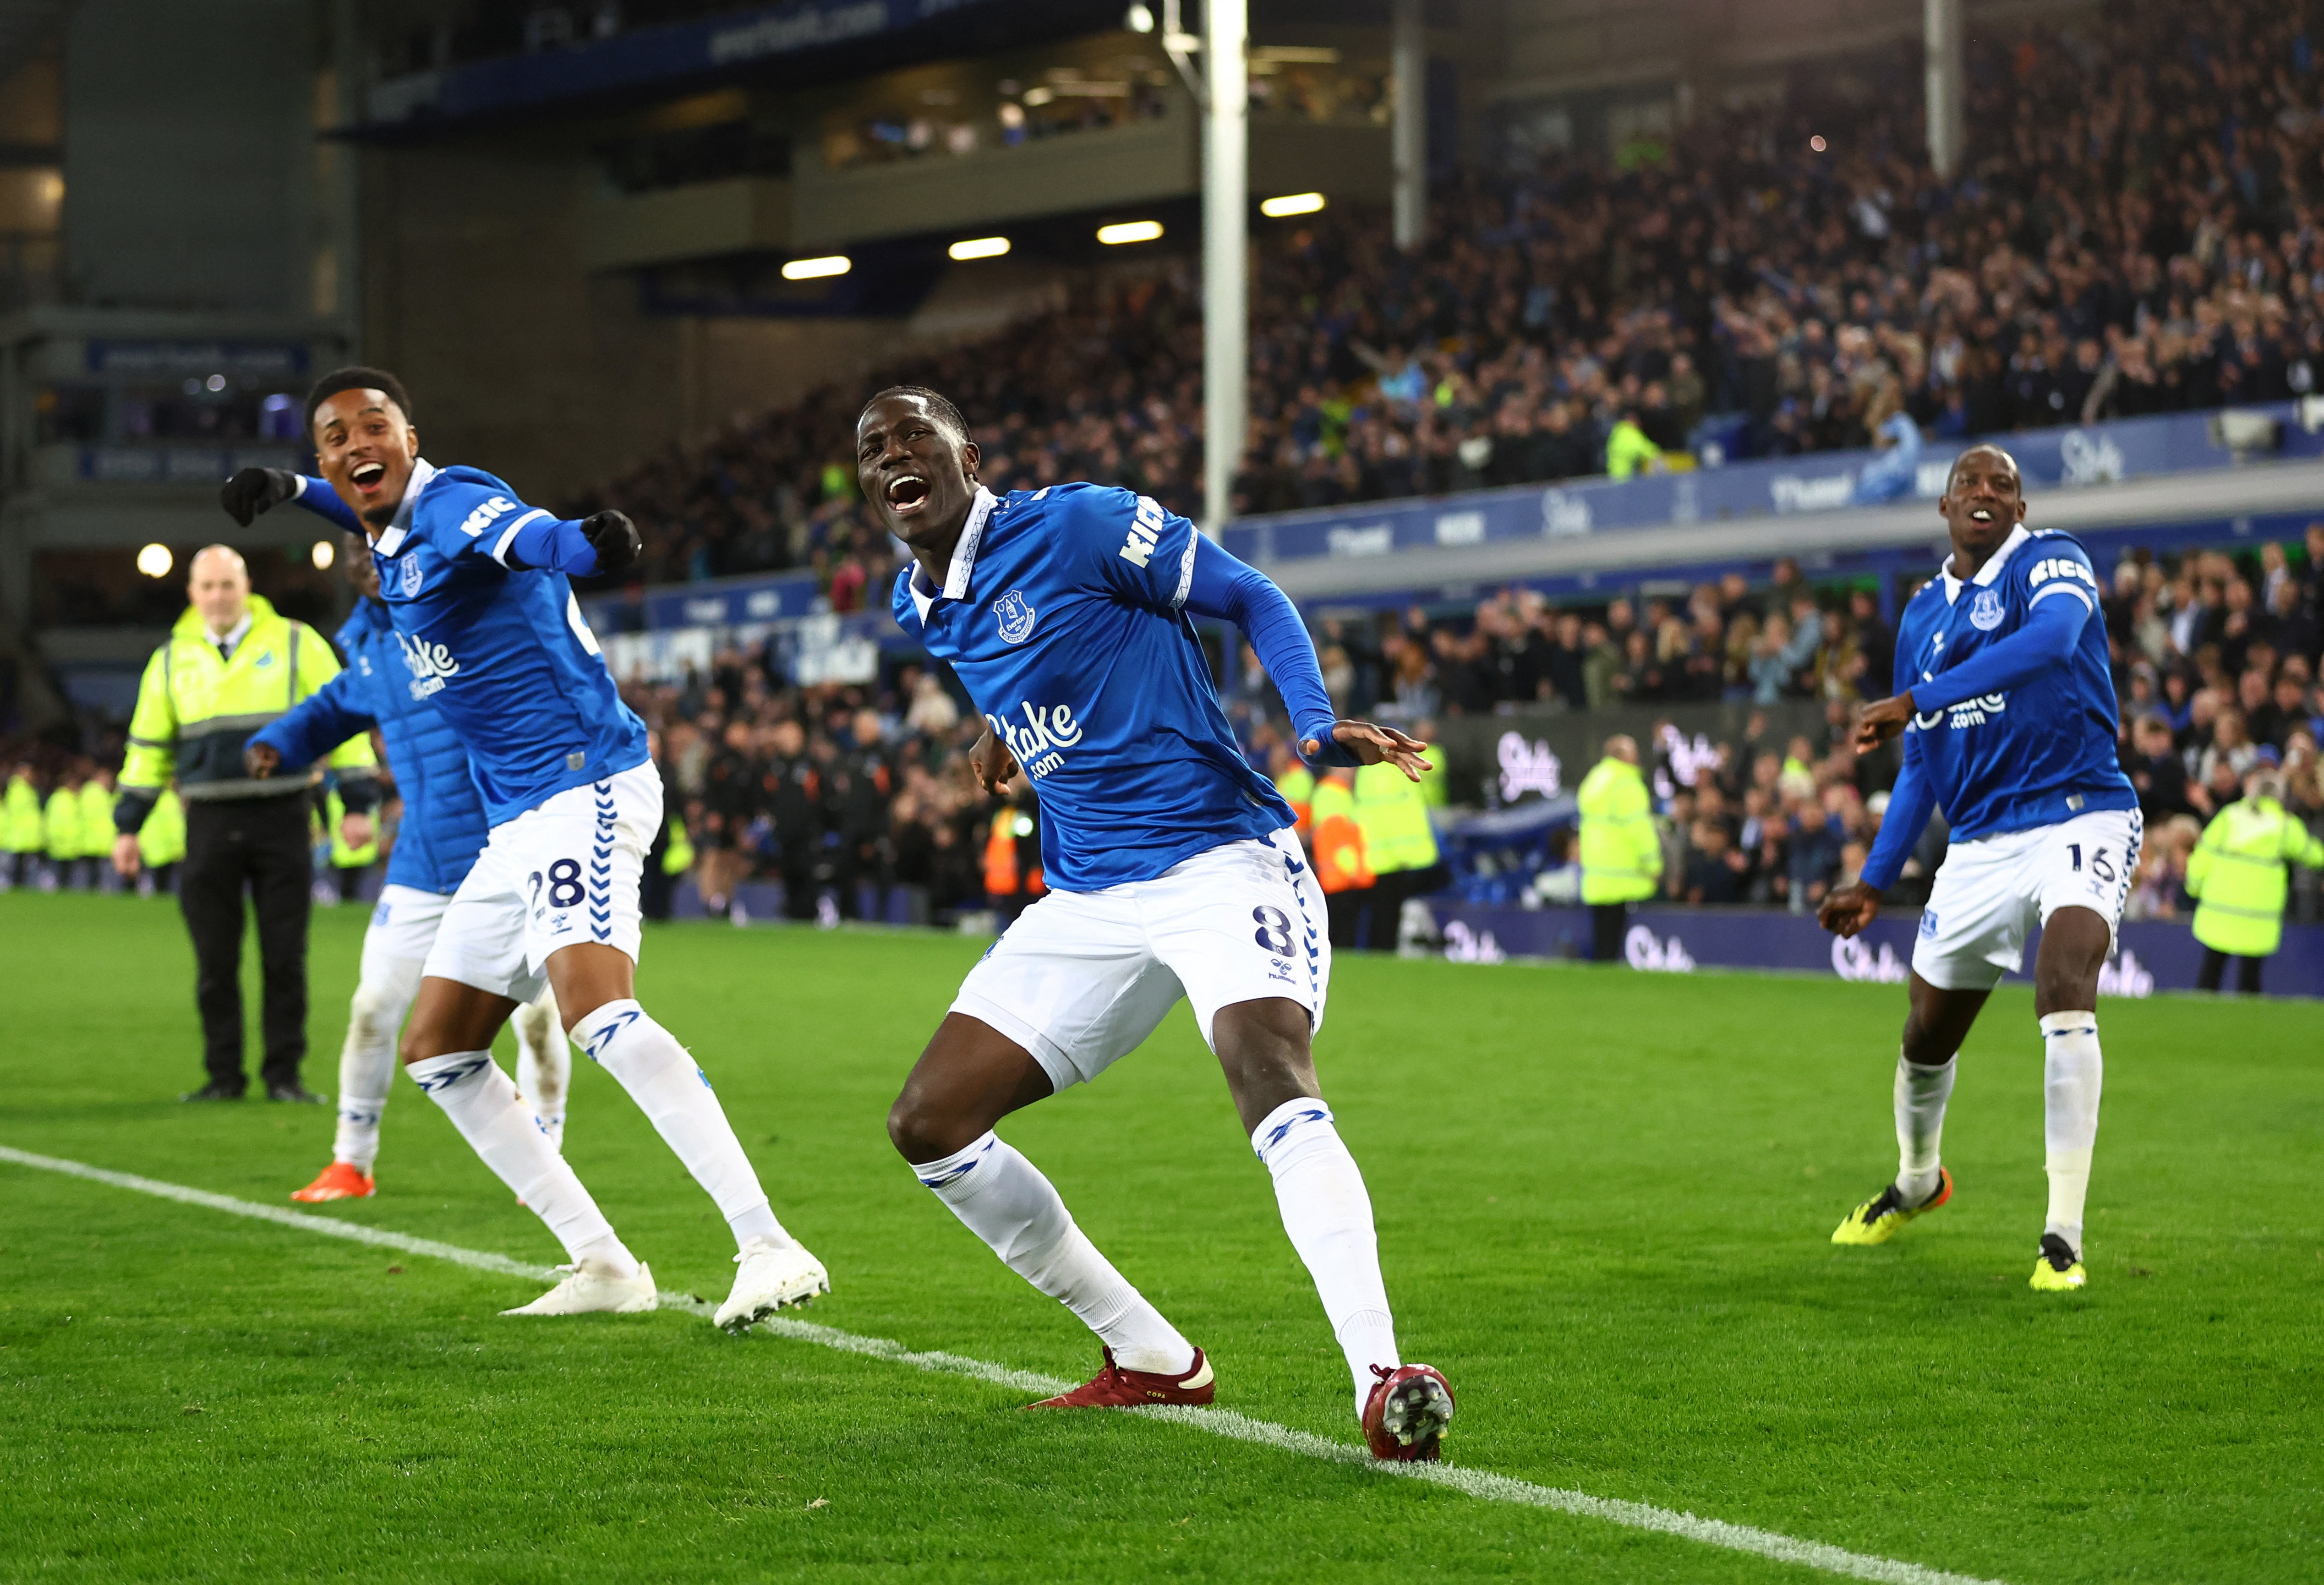 image Everton deal Liverpool big blow with shock 2-0 victory, Man United remain in hunt for 5th spot